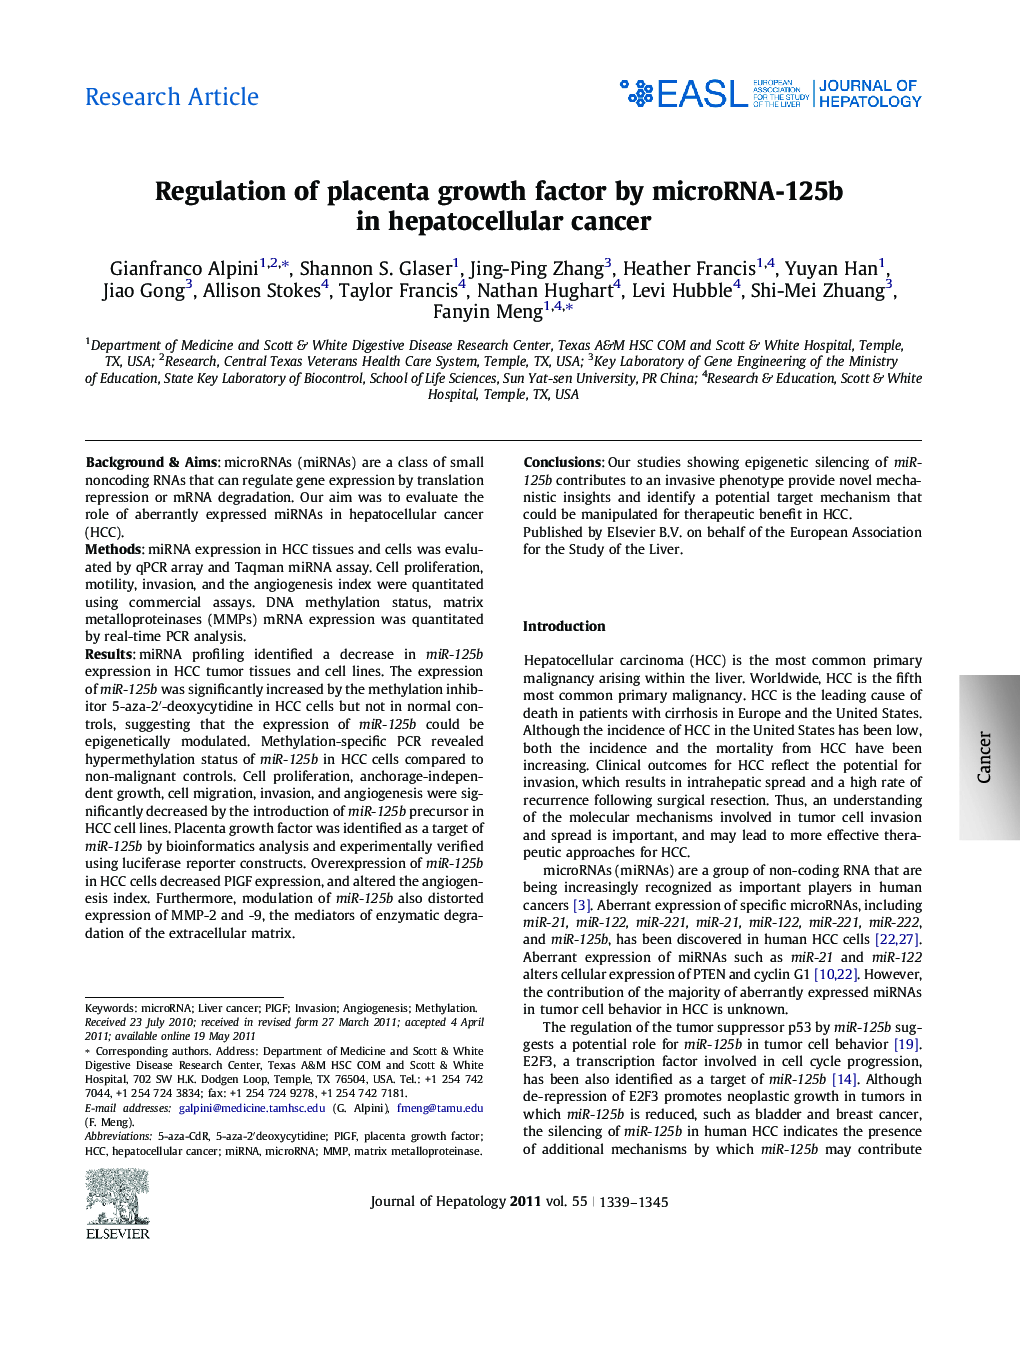 Research ArticleRegulation of placenta growth factor by microRNA-125b in hepatocellular cancer